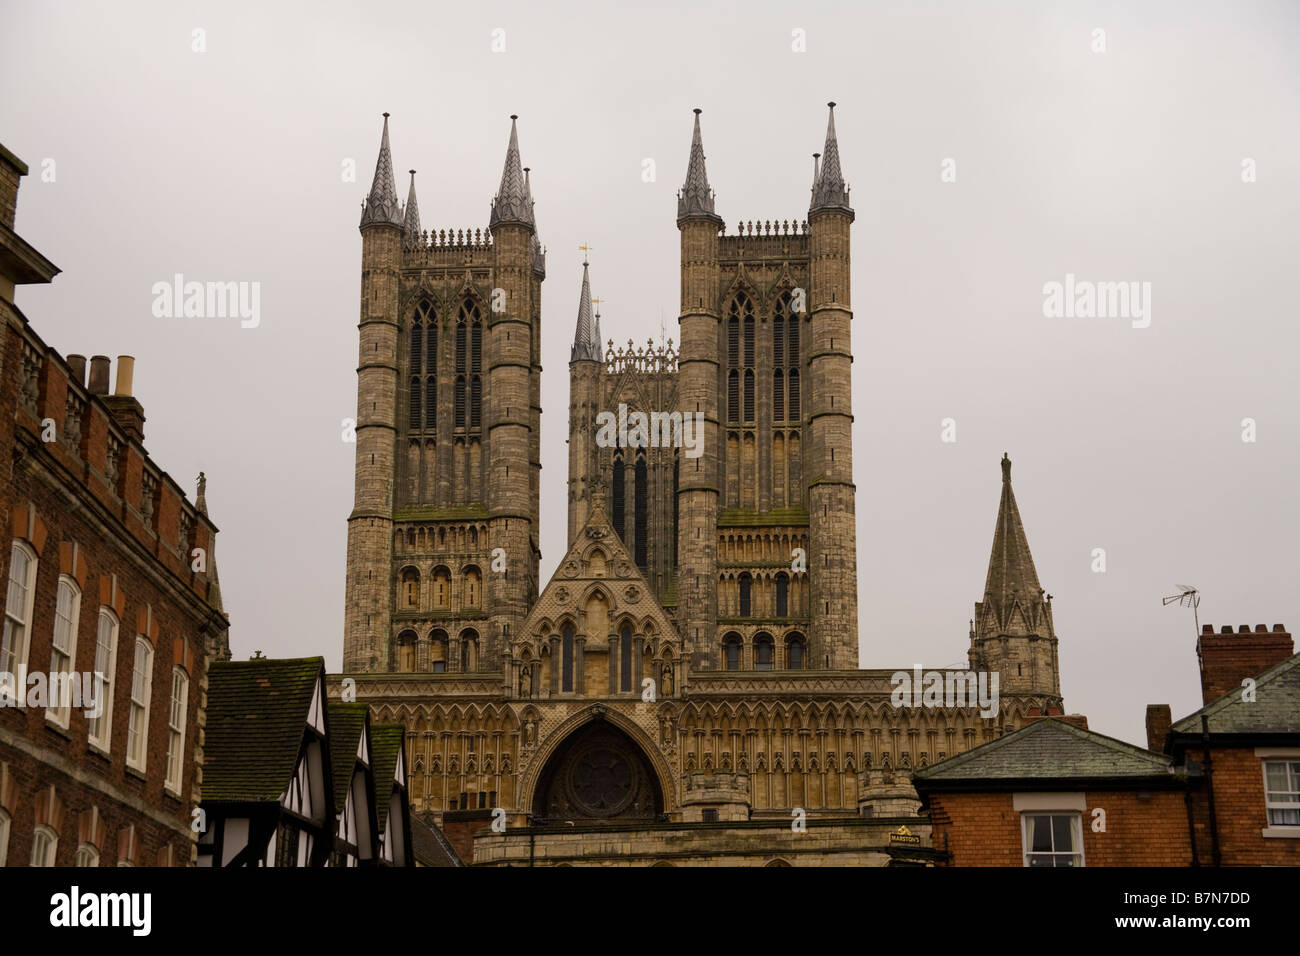 The towers of Lincoln Cathedral, England. Stock Photo